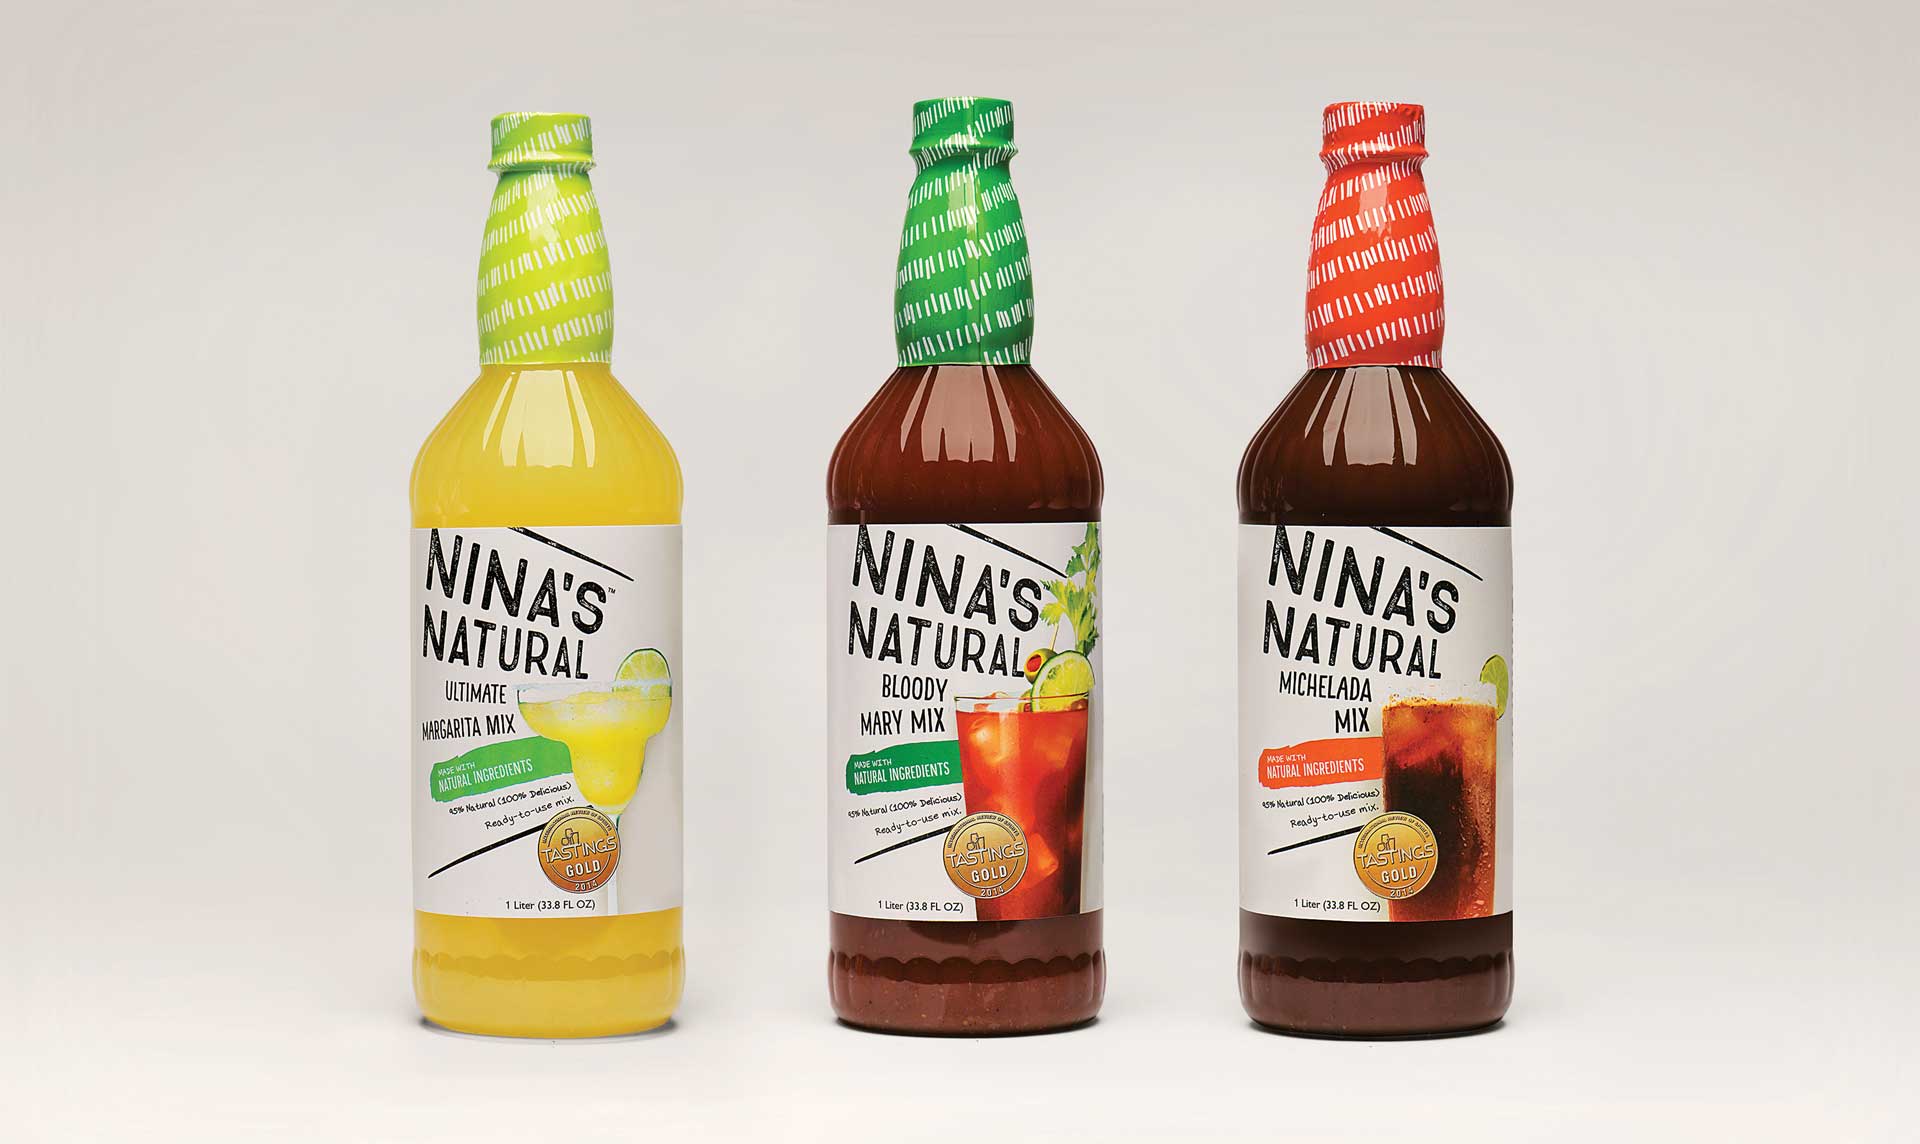 Nina's Natural Branding and Packaging Design - Product Line